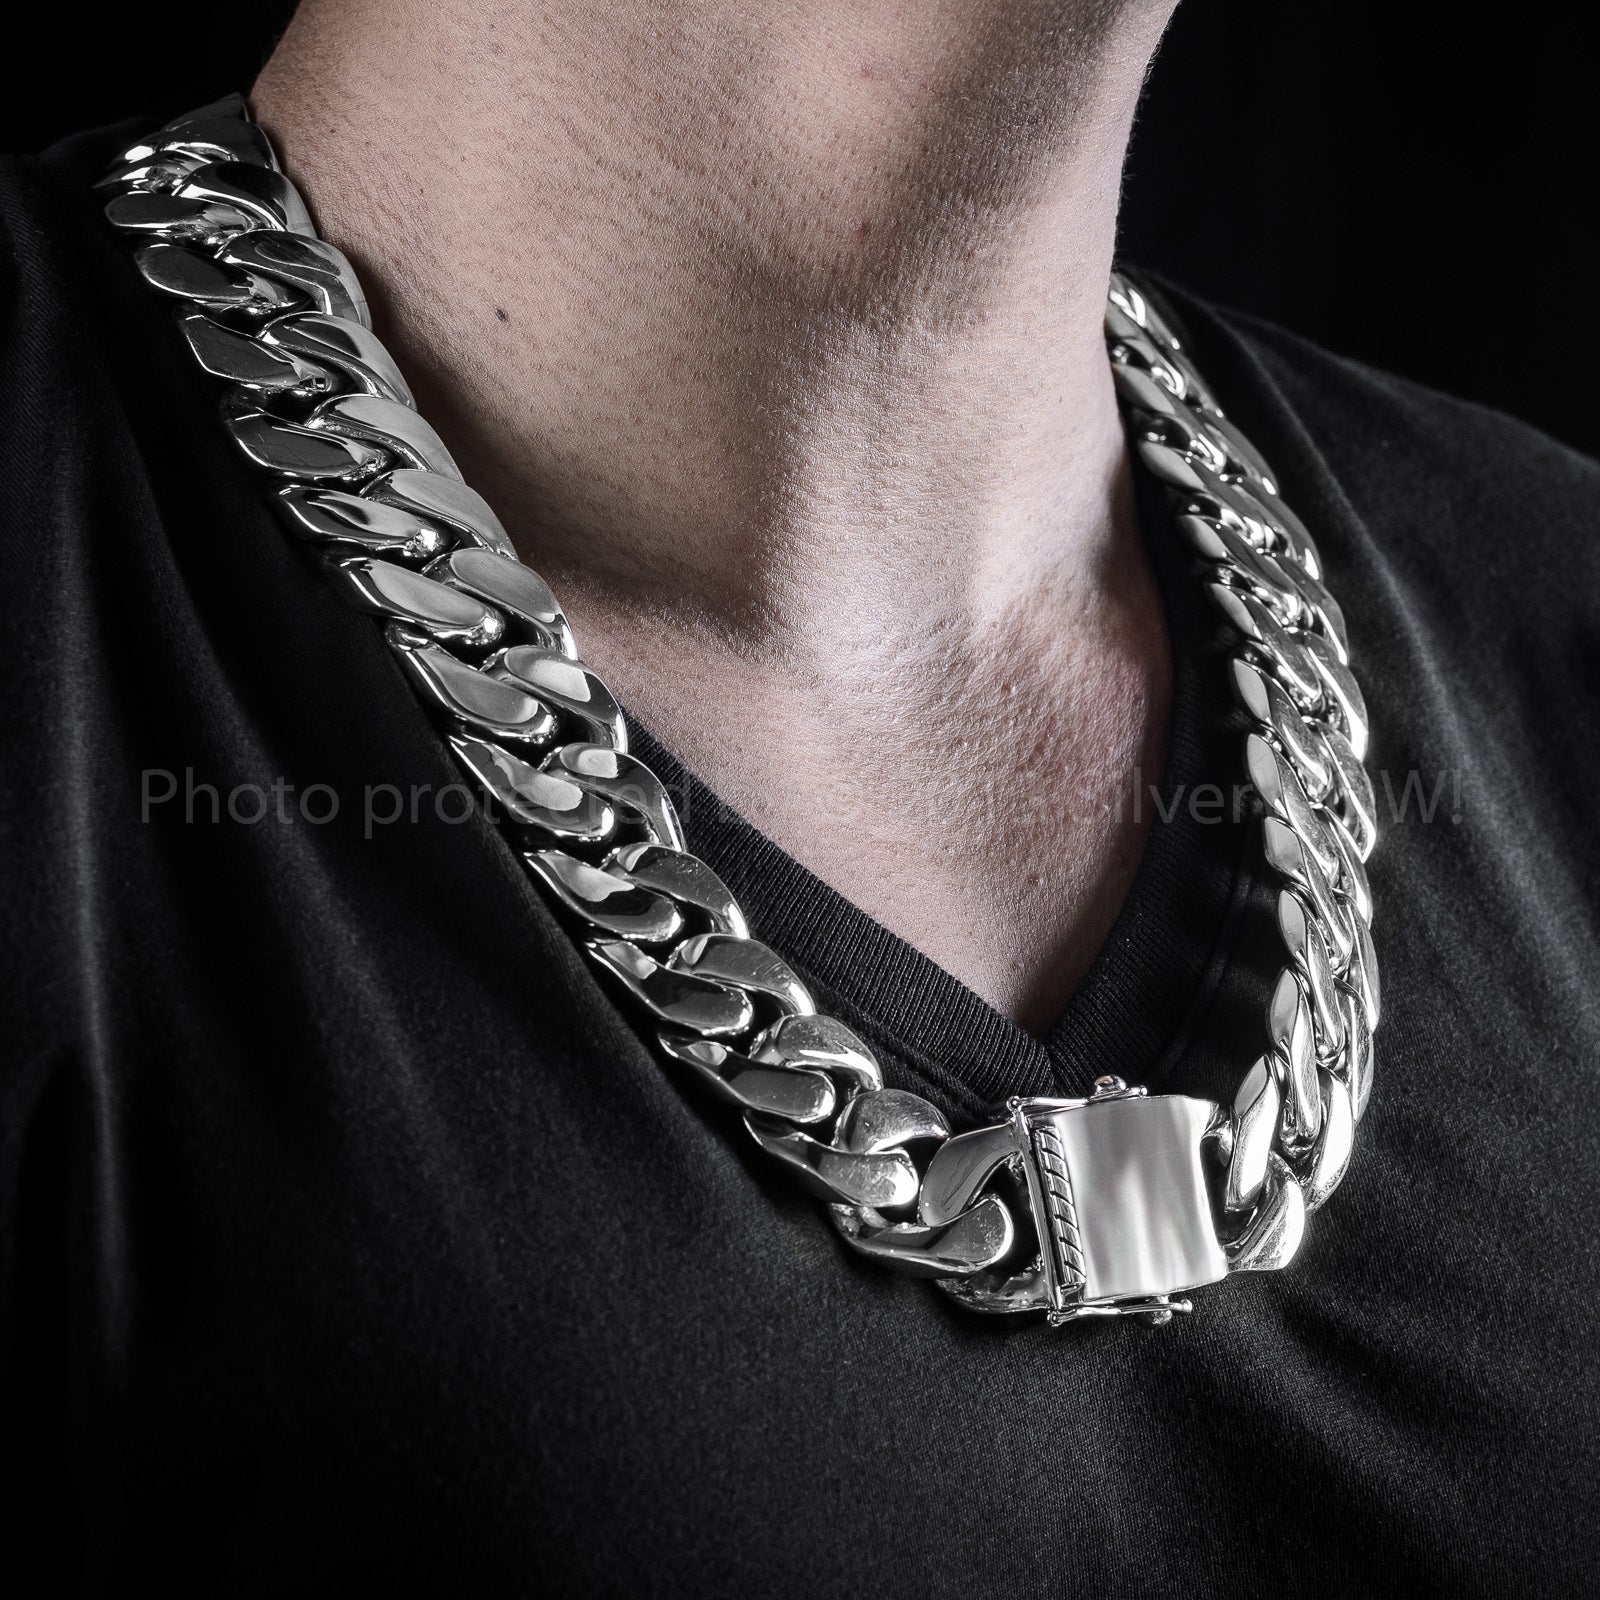 Double Link Silver Chain, Silver Chains South Africa